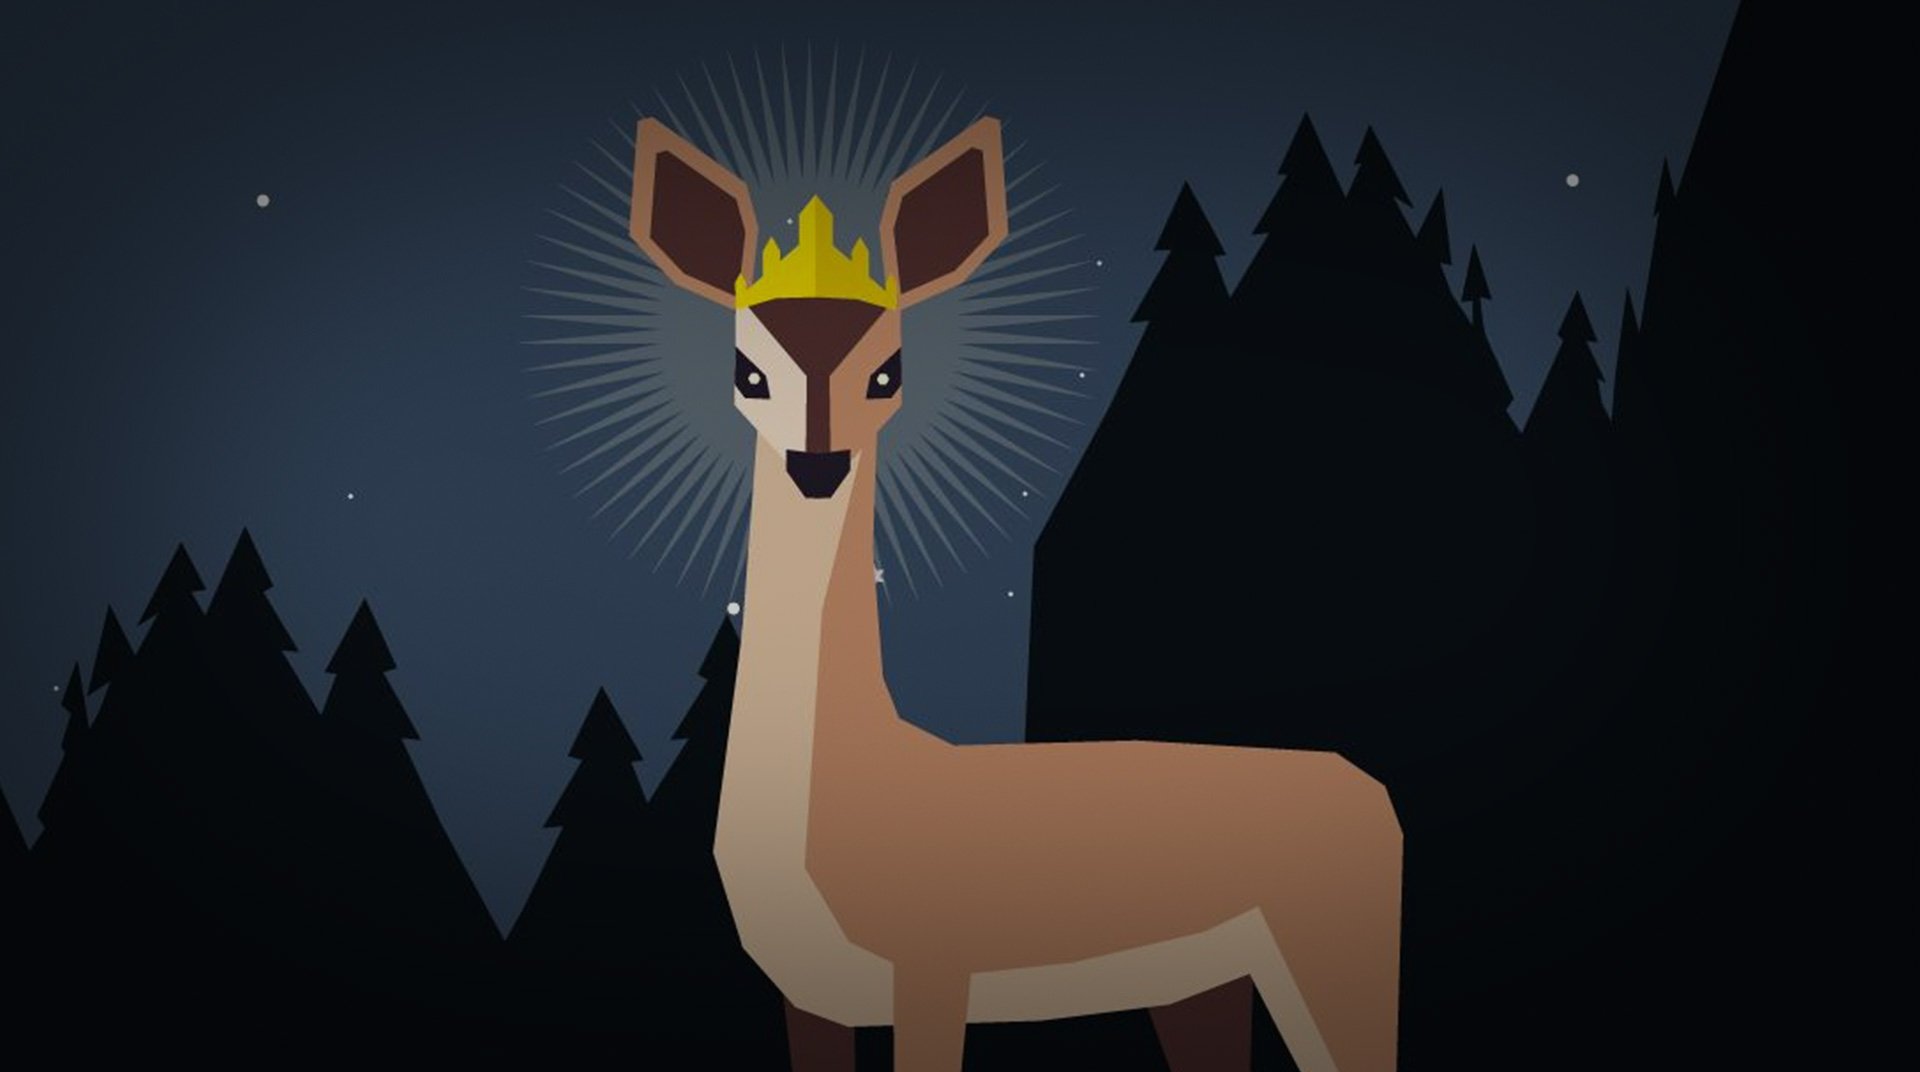 download reigns her majesty for free